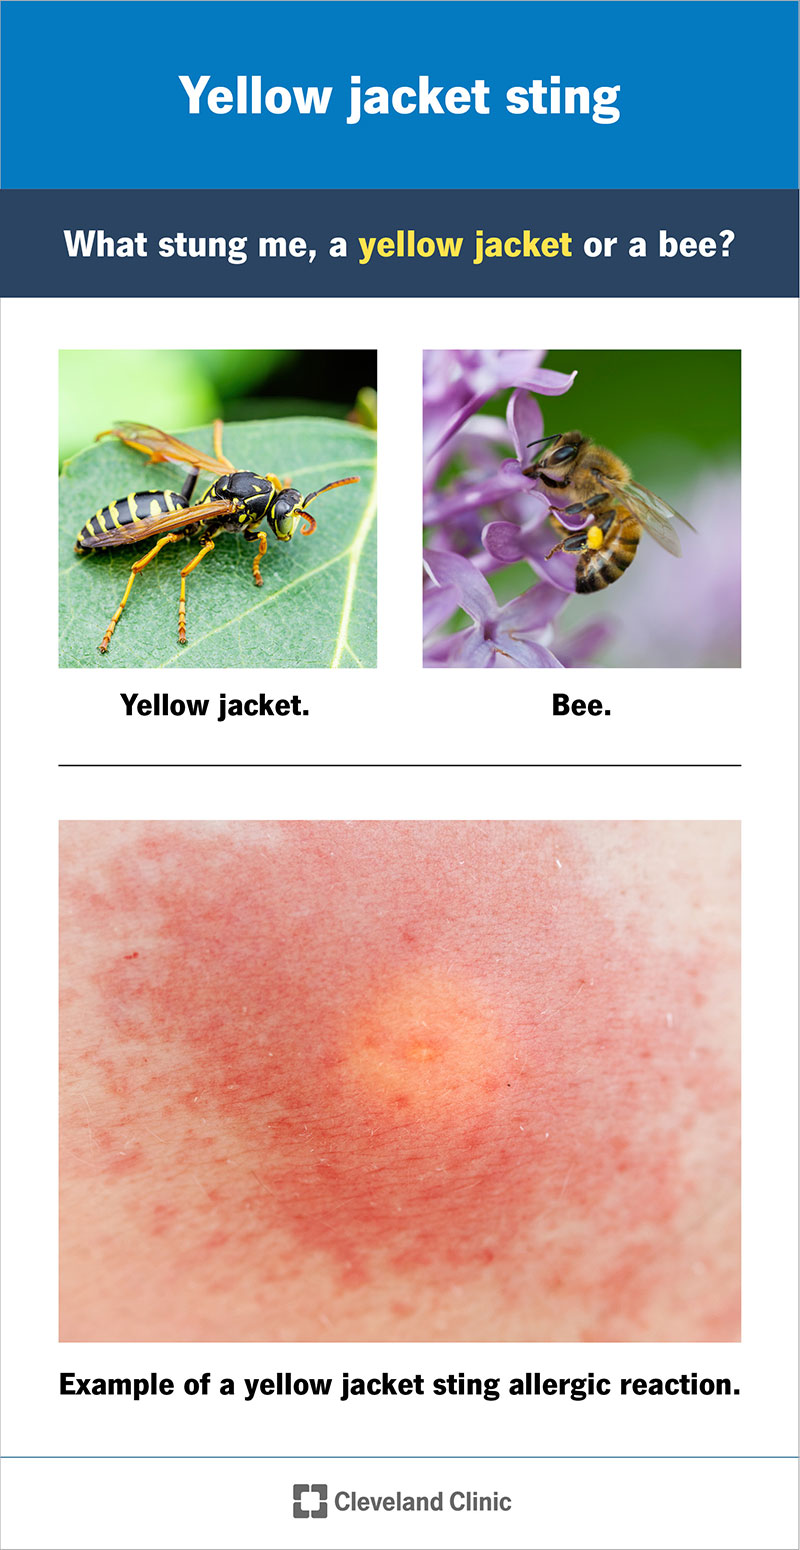 Yellow jacket and bee, with yellow jacket sting that is red and swollen